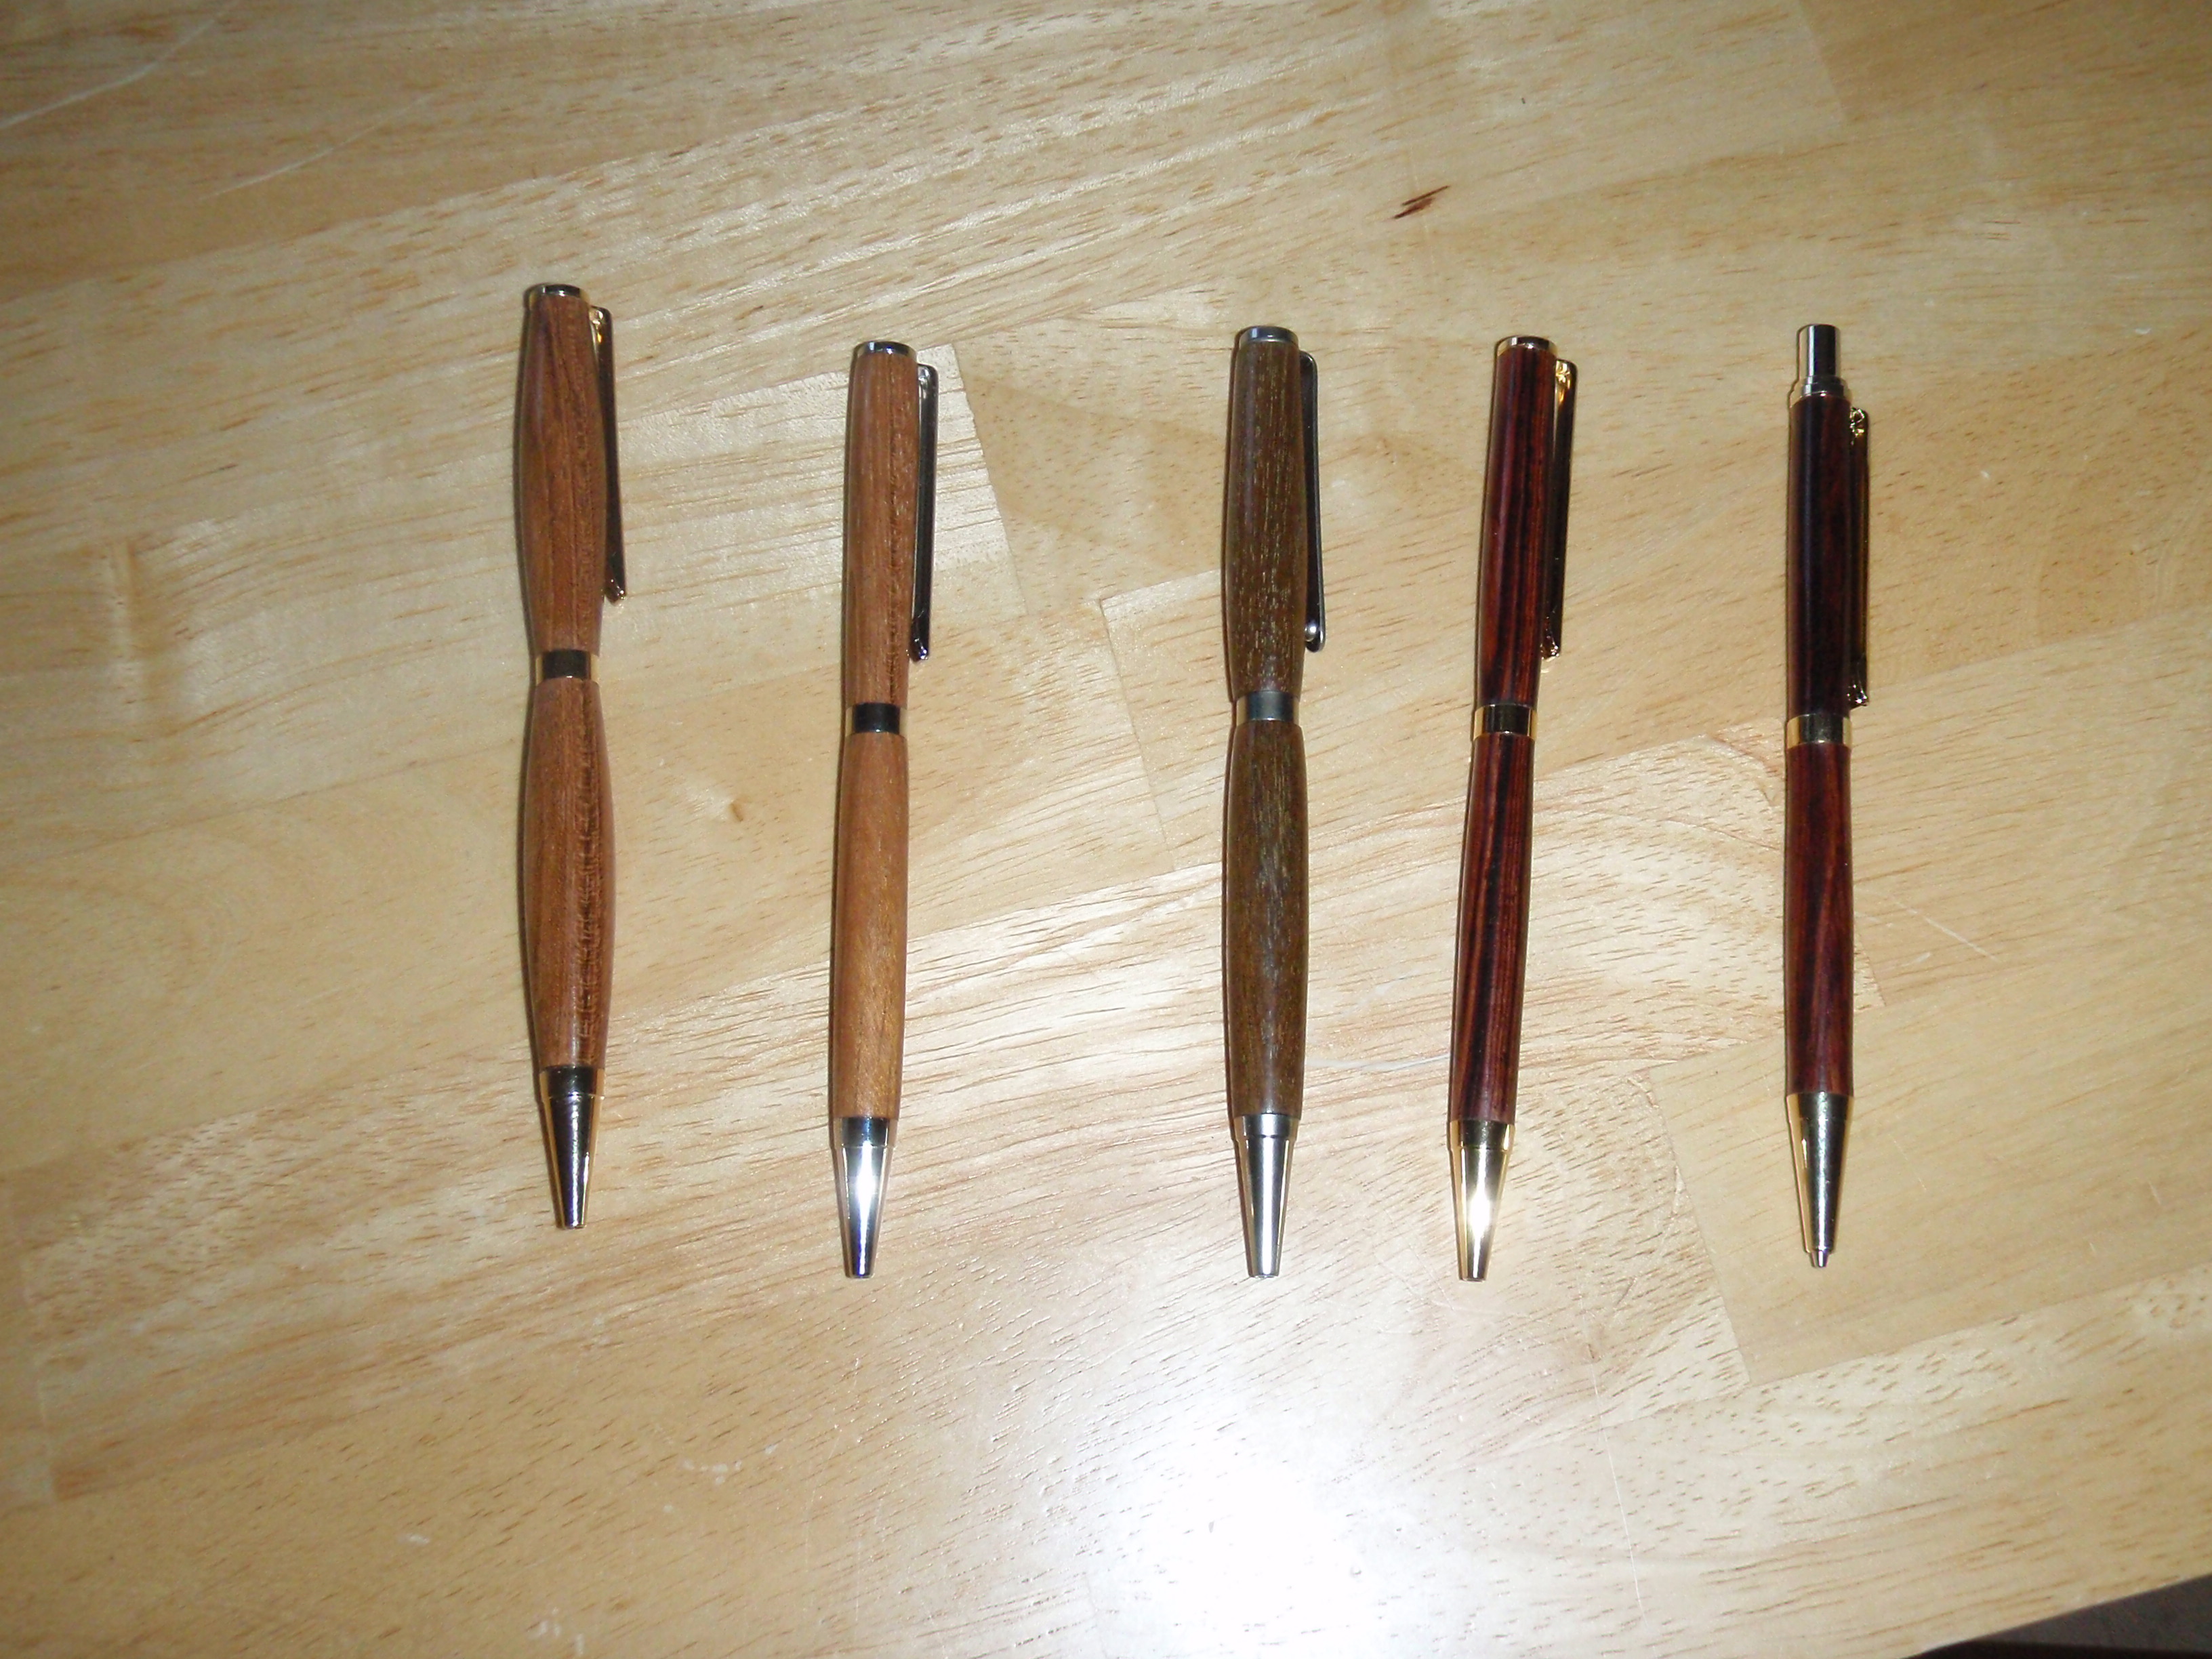 Overview of pens